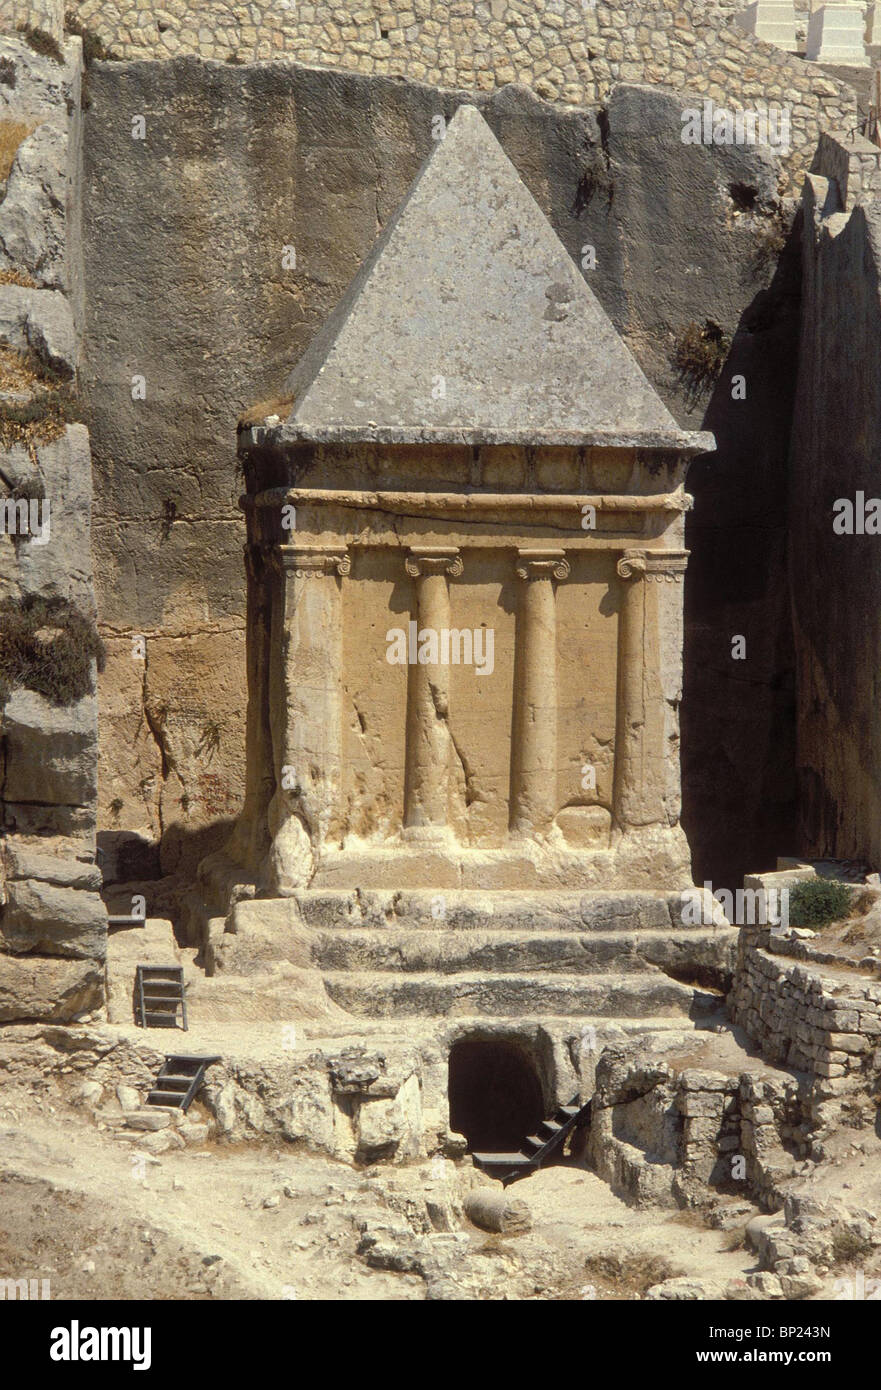 ROCK-HEWEN STRUCTURE IN THE KIDRON VALLEY EAST OF THE TEMPLE MOUNT BUILT IN THE FIRST C. BC. TRADITIONALY REGARDED AS THE TOMB Stock Photo